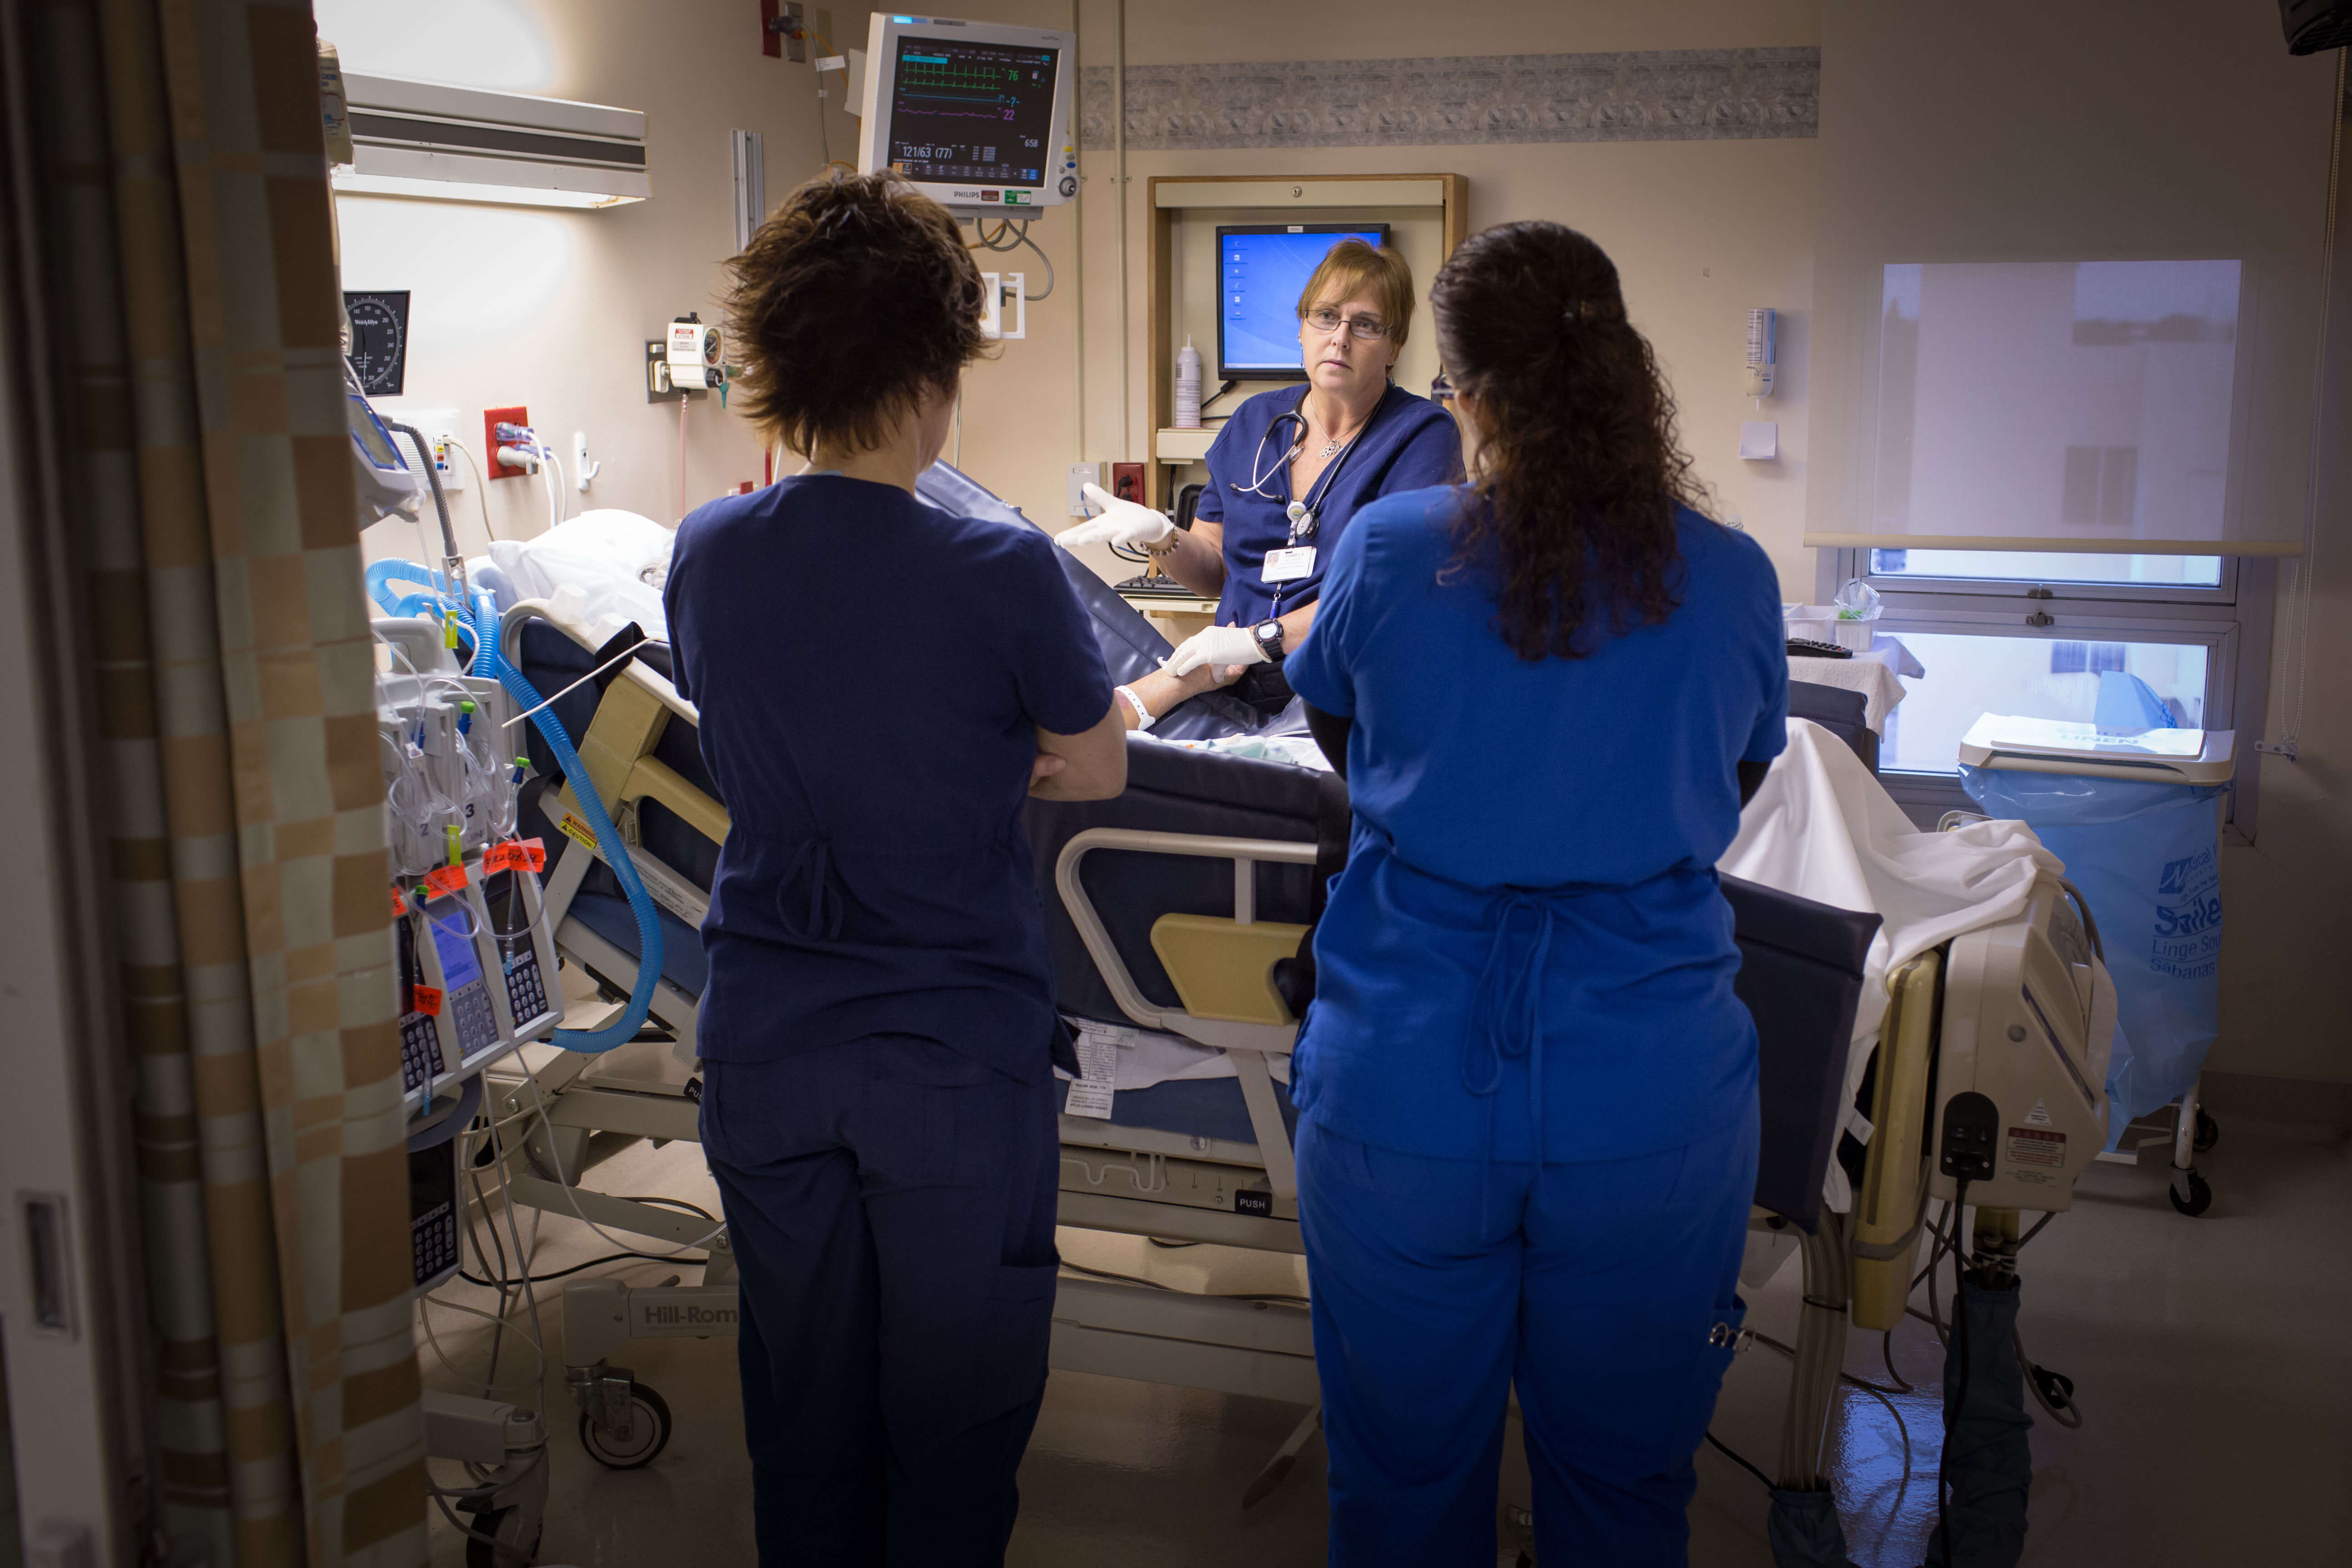 Nurses working on patient in hospital bed